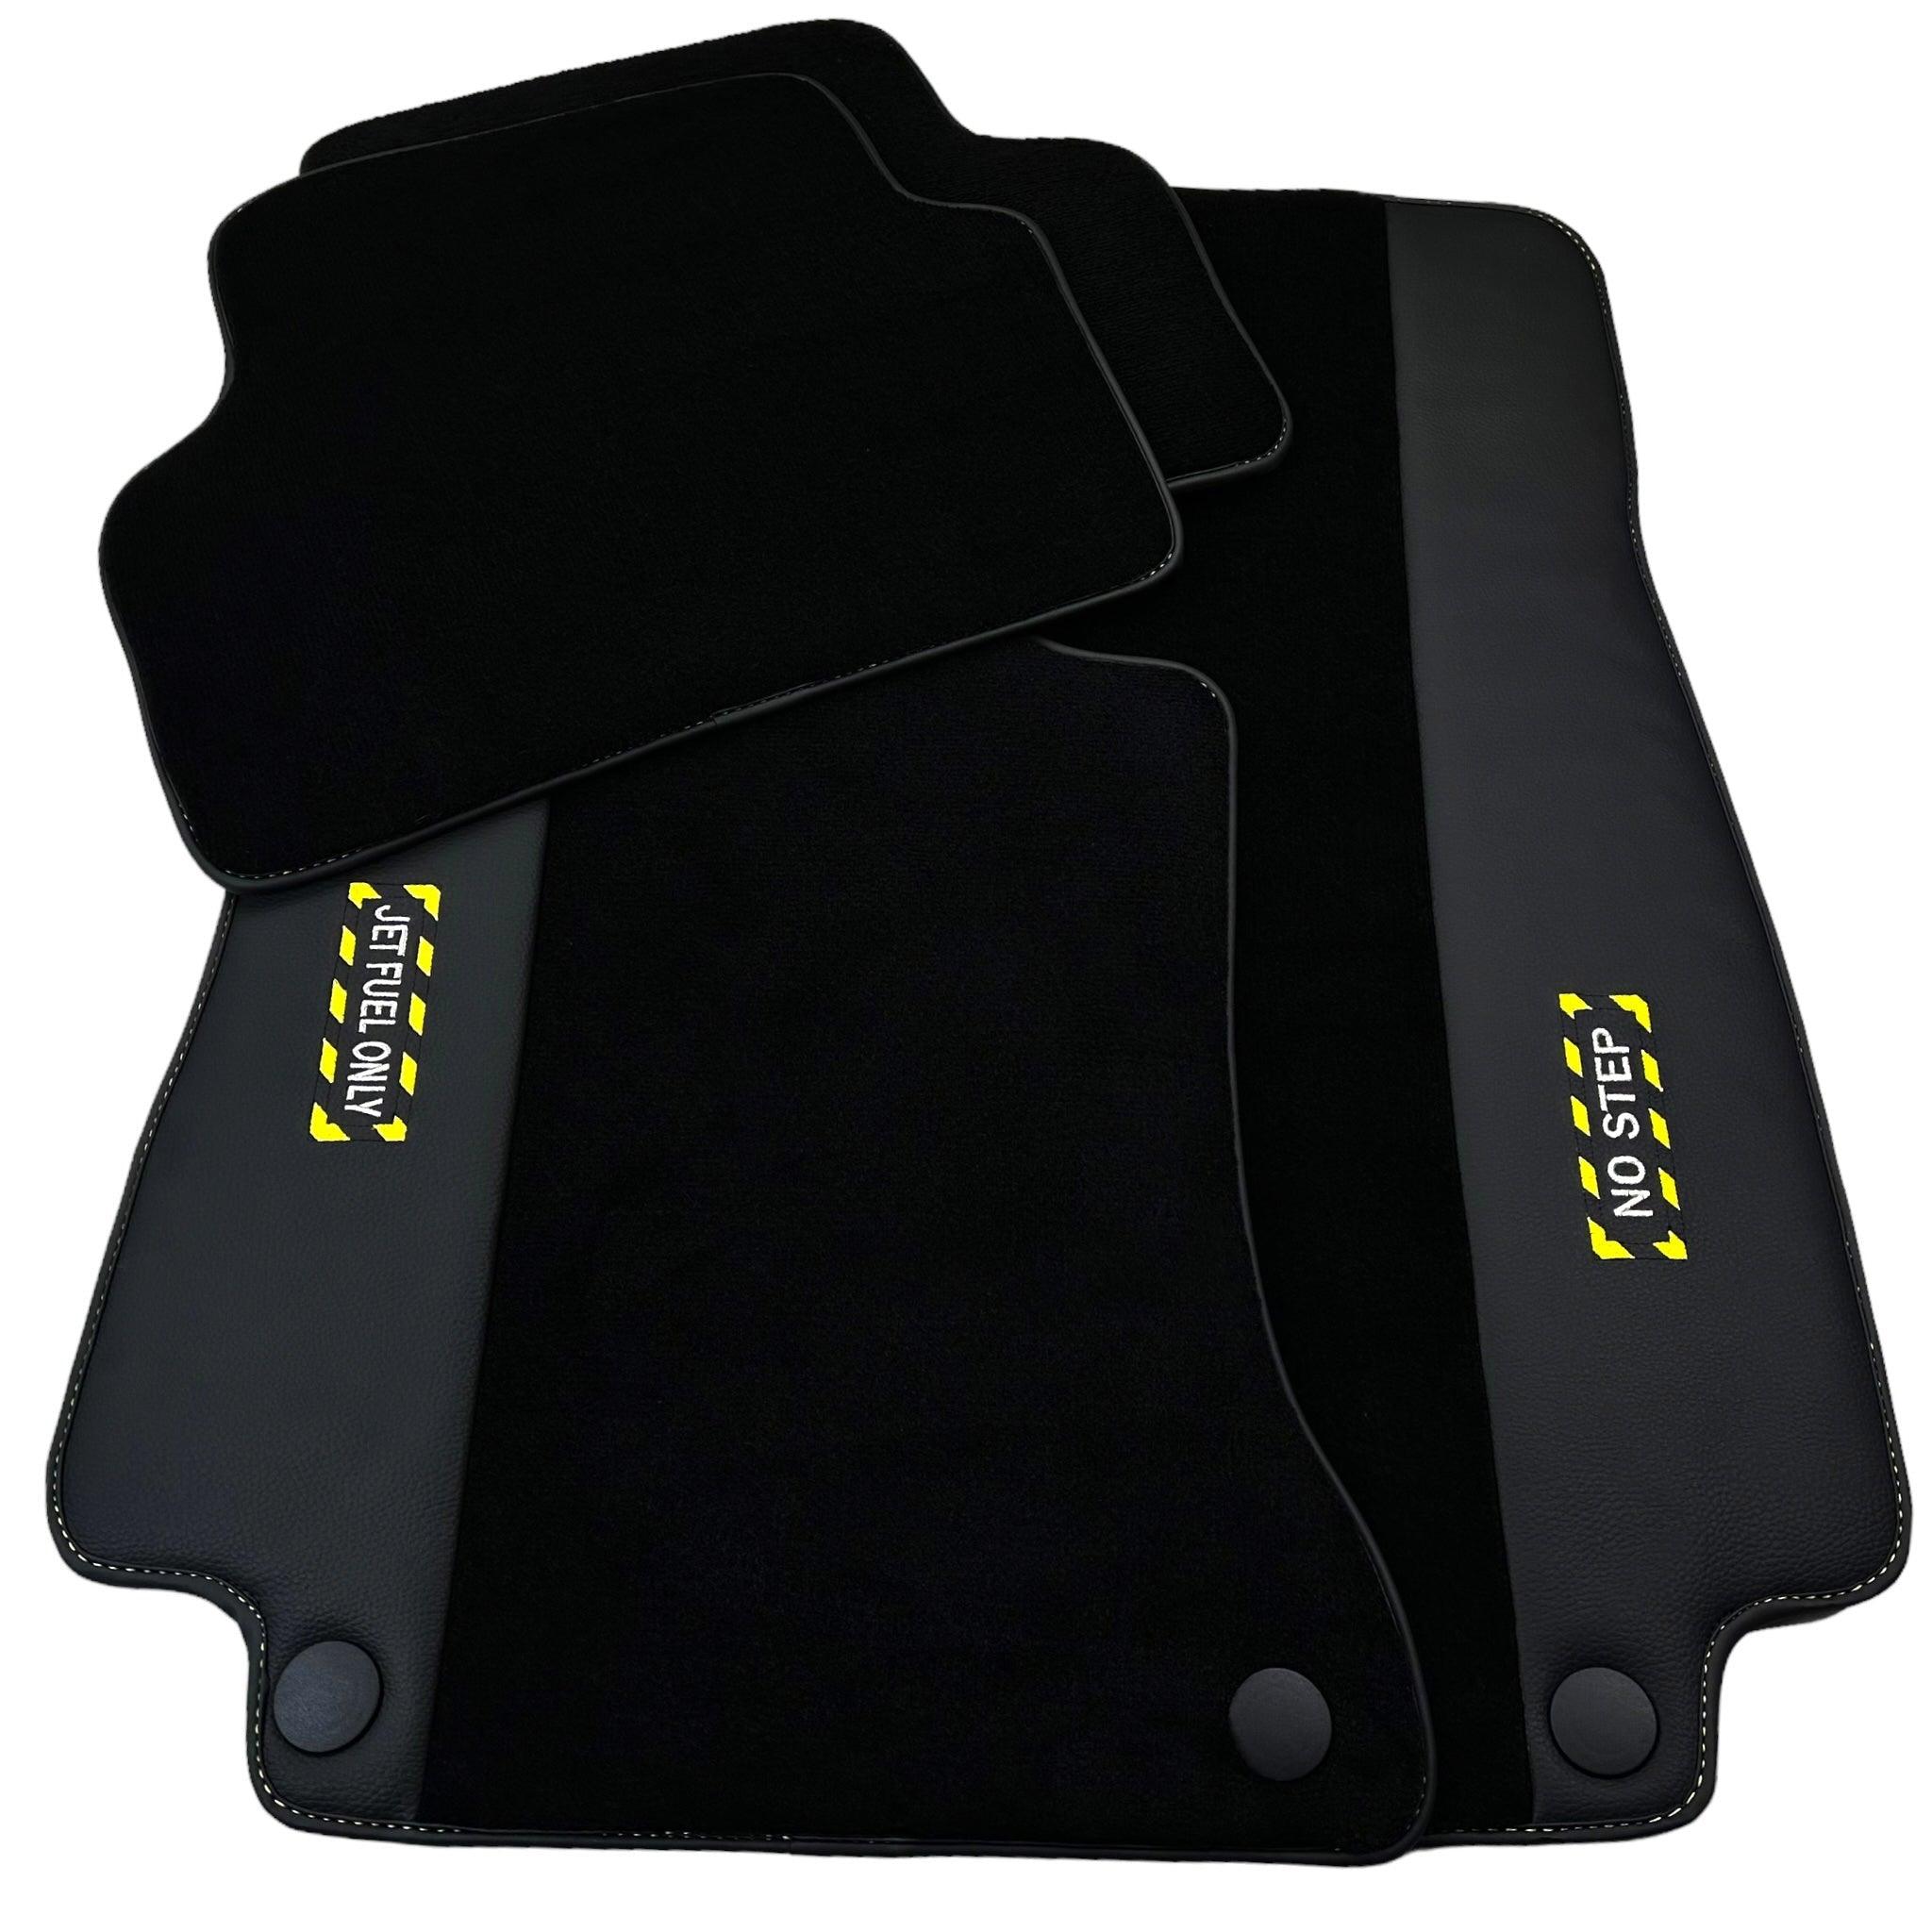 Black Floor Mats For Mercedes Benz S-Class Z223 Maybach (2021-2023) | Fighter Jet Edition